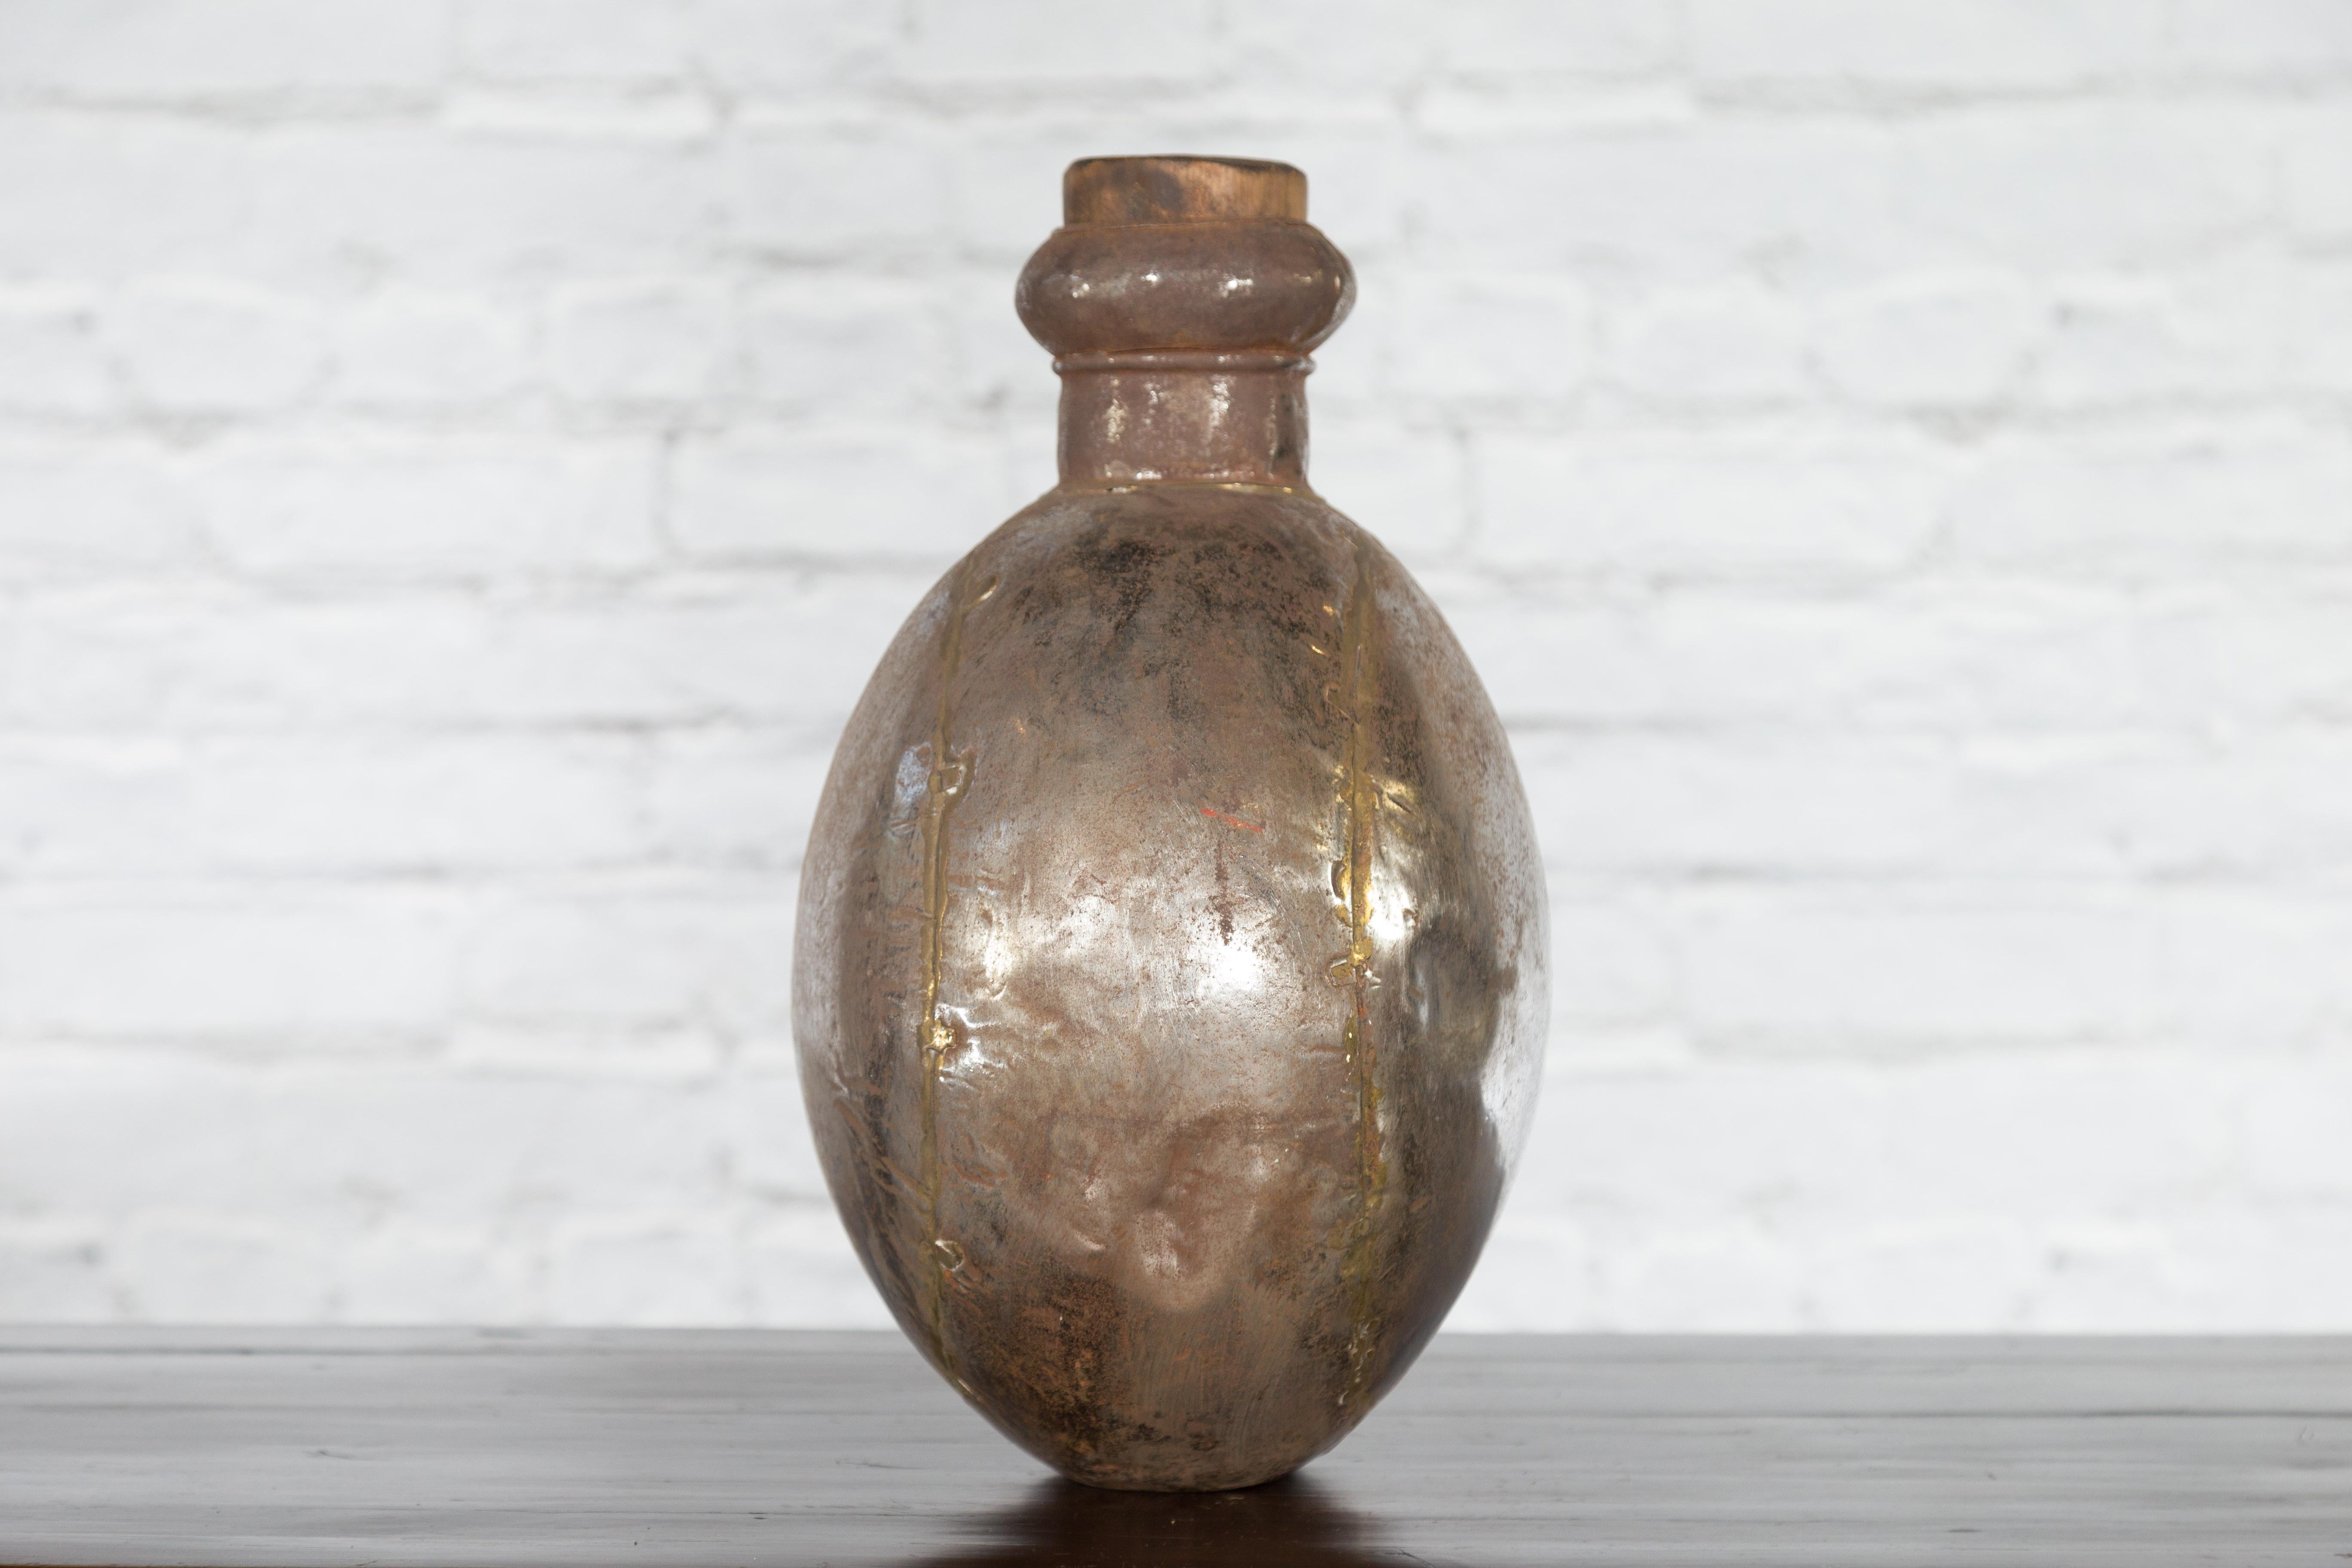 Indian Vintage Metal Water Vase with Cork Style Top and Circular Body For Sale 4